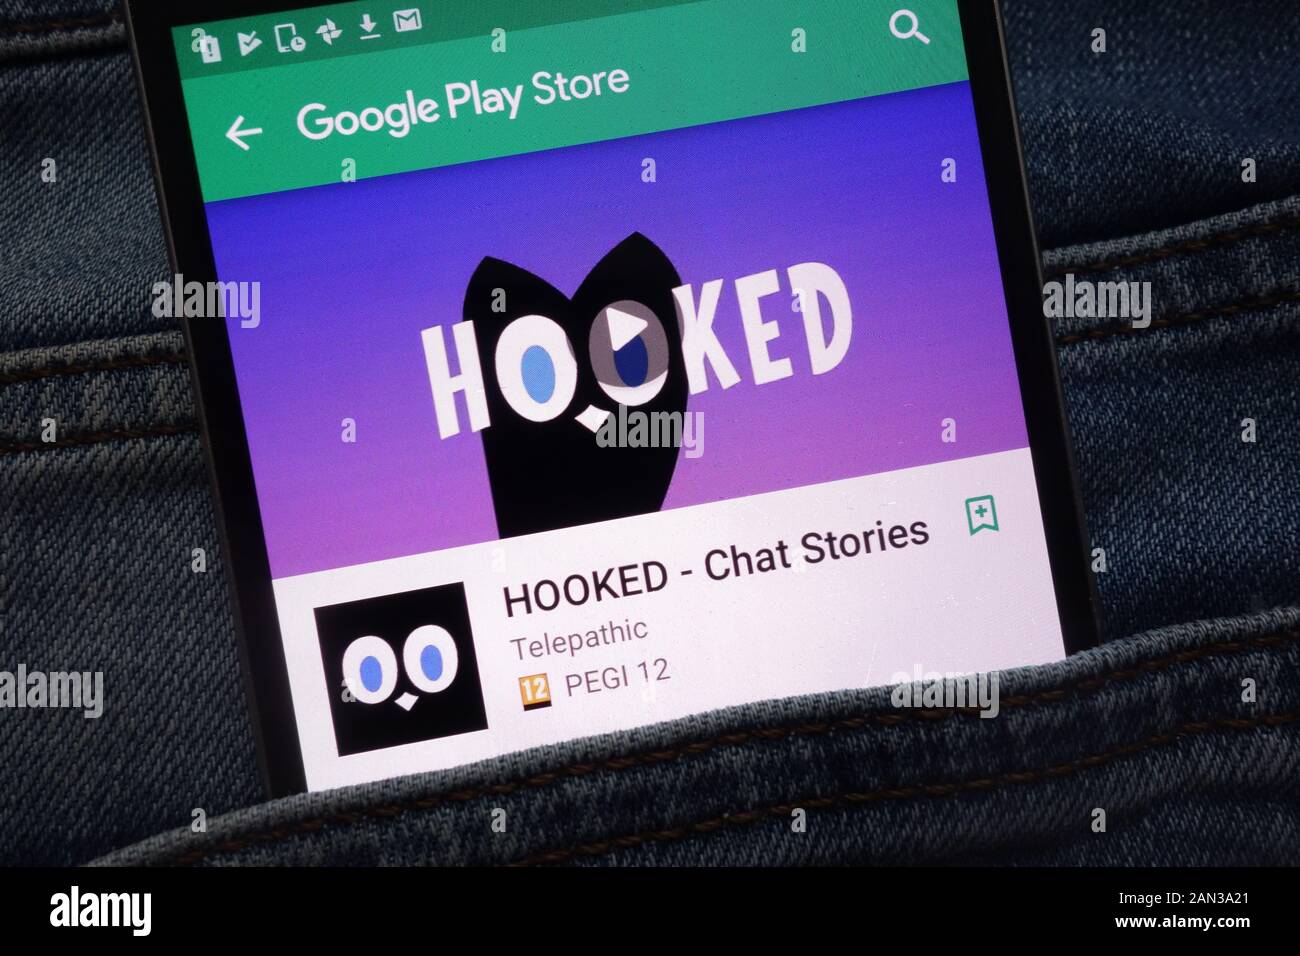 HOOKED - Chat Stories - Apps on Google Play